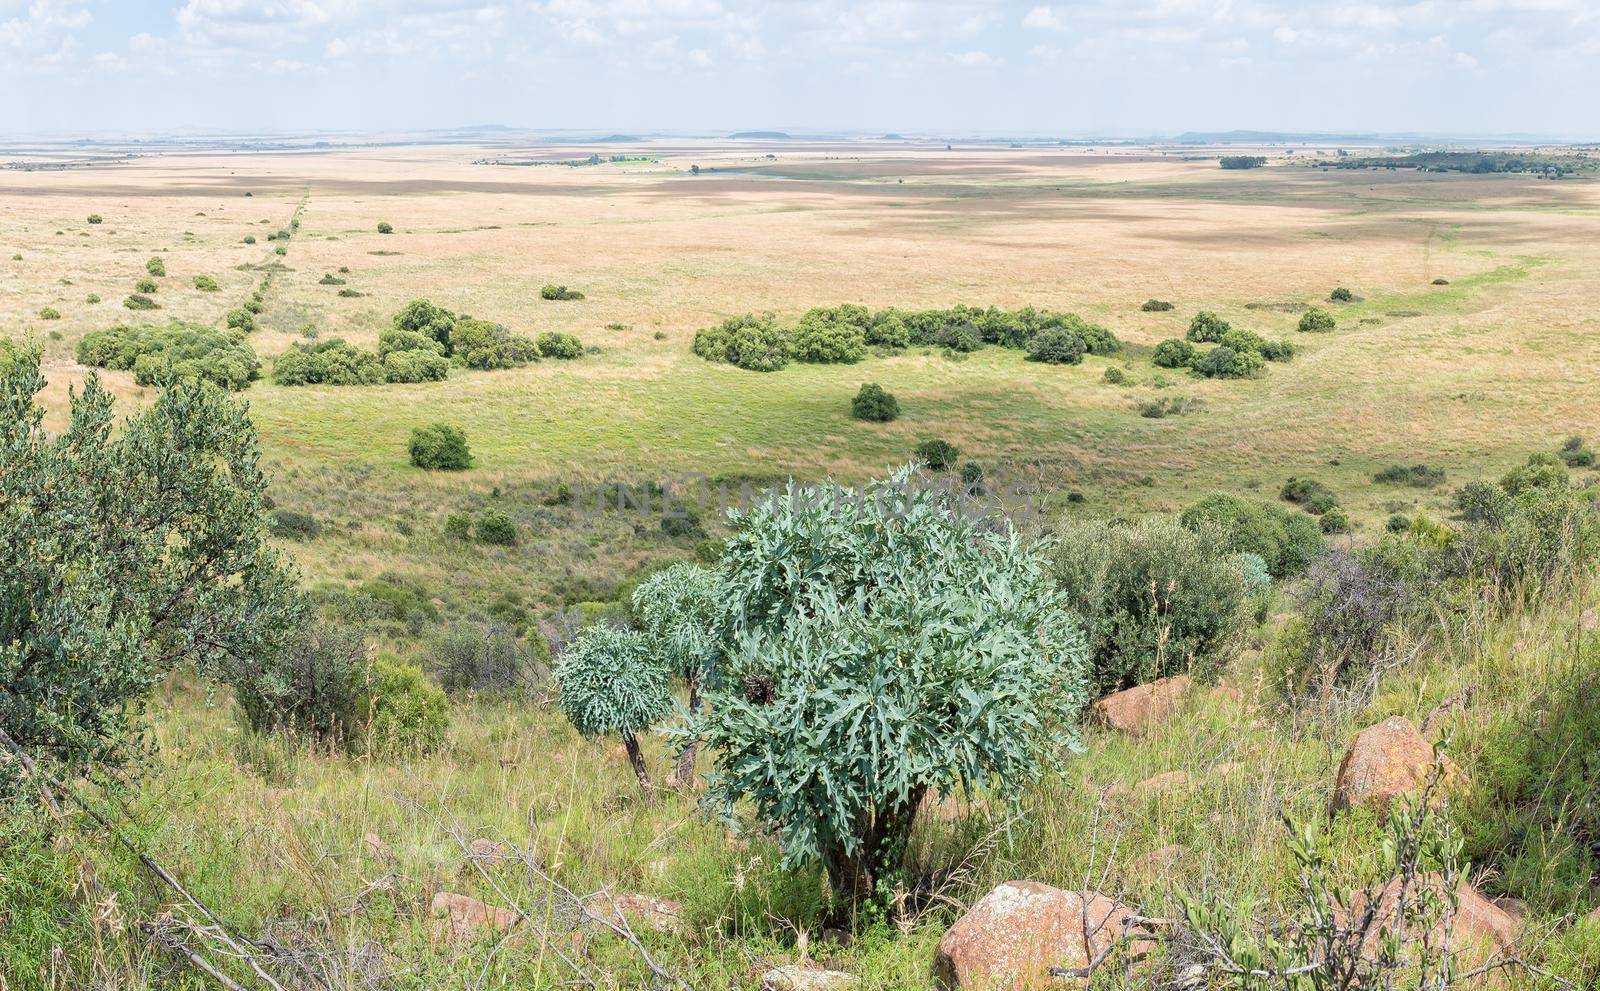 View of a farm near Bloemfontein. A mountain cabbage-tree, Cussonia paniculata, is visible